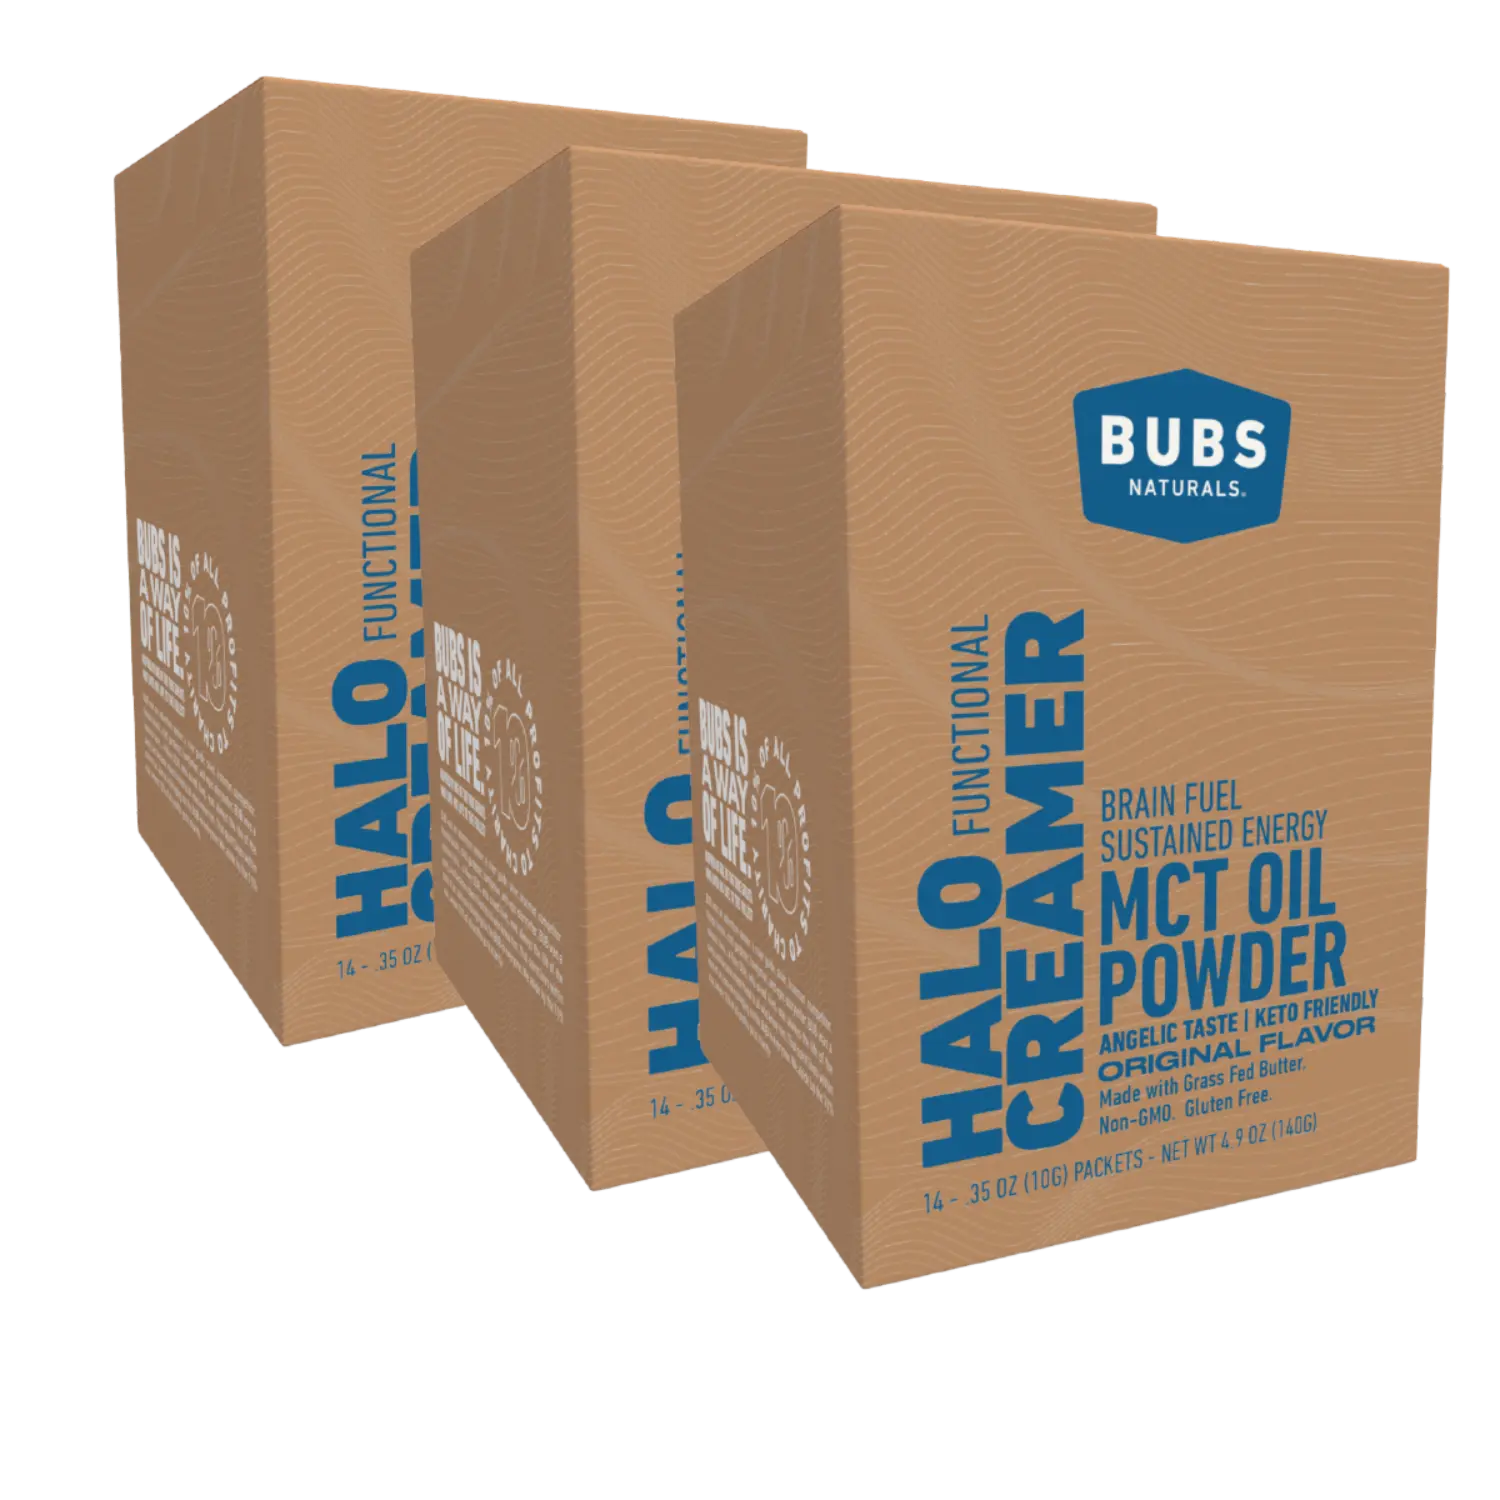 BUBS Naturals Halo Creamer with MCT Oil Powder and Grass Fed Butter,  14ct travel pack, bundle of 3